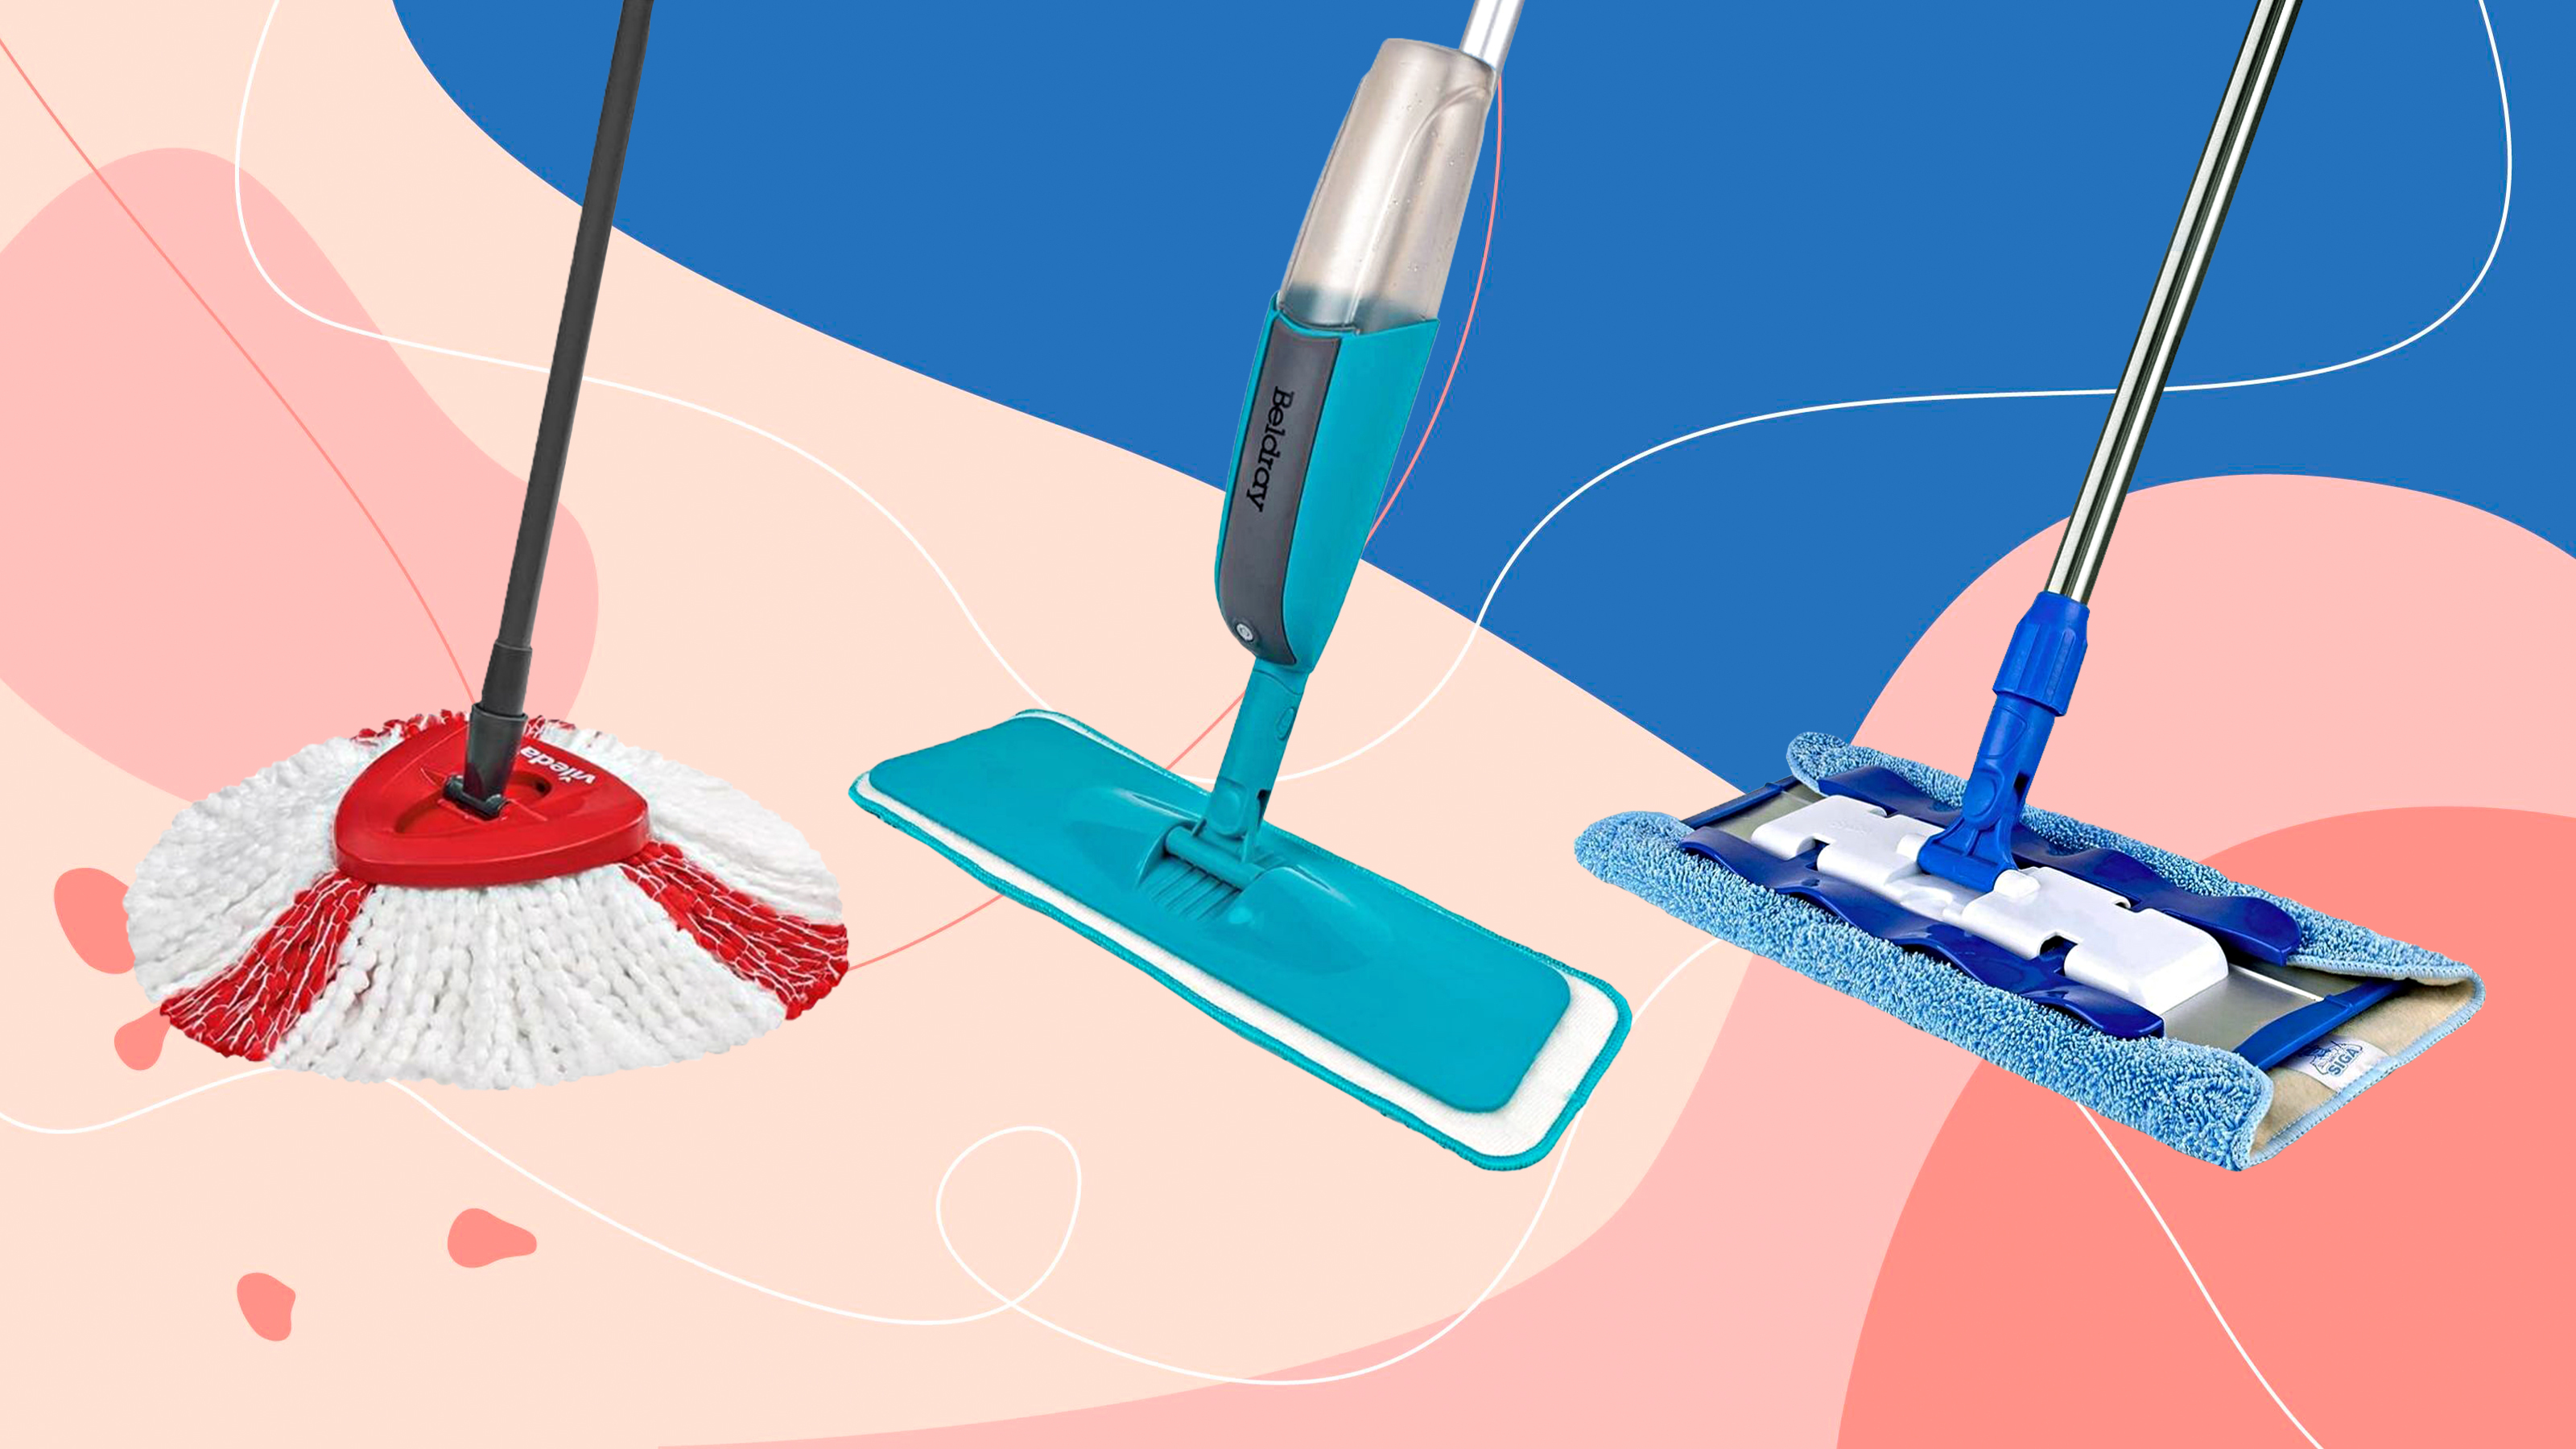 9 Best Mops of 2024 - Reviewed